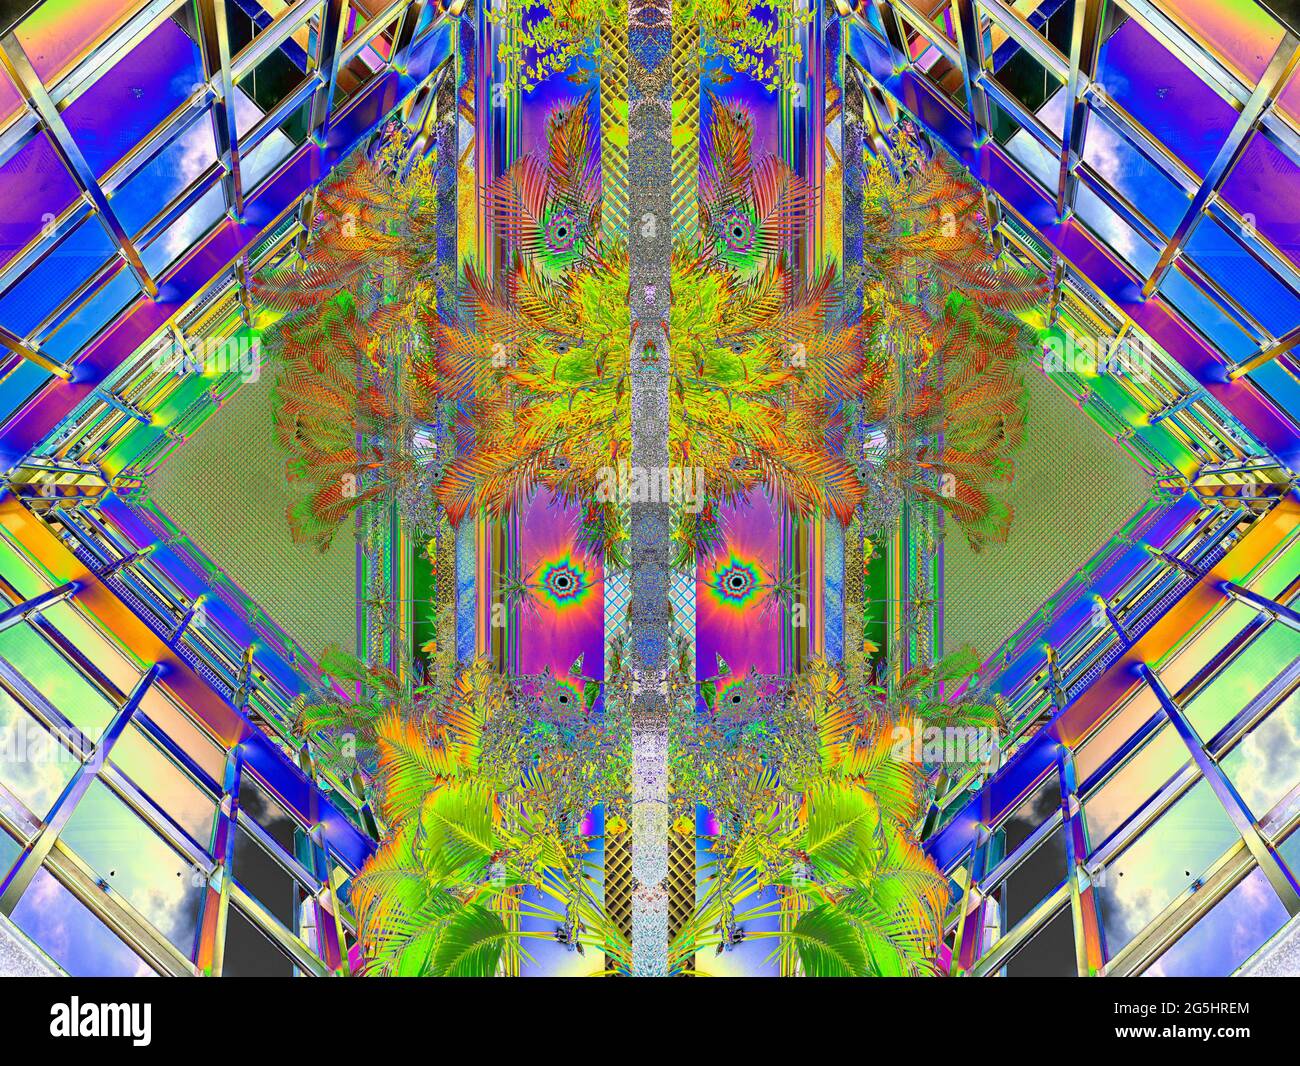 kaleidoscopic image of the interior of a modern building Stock Photo